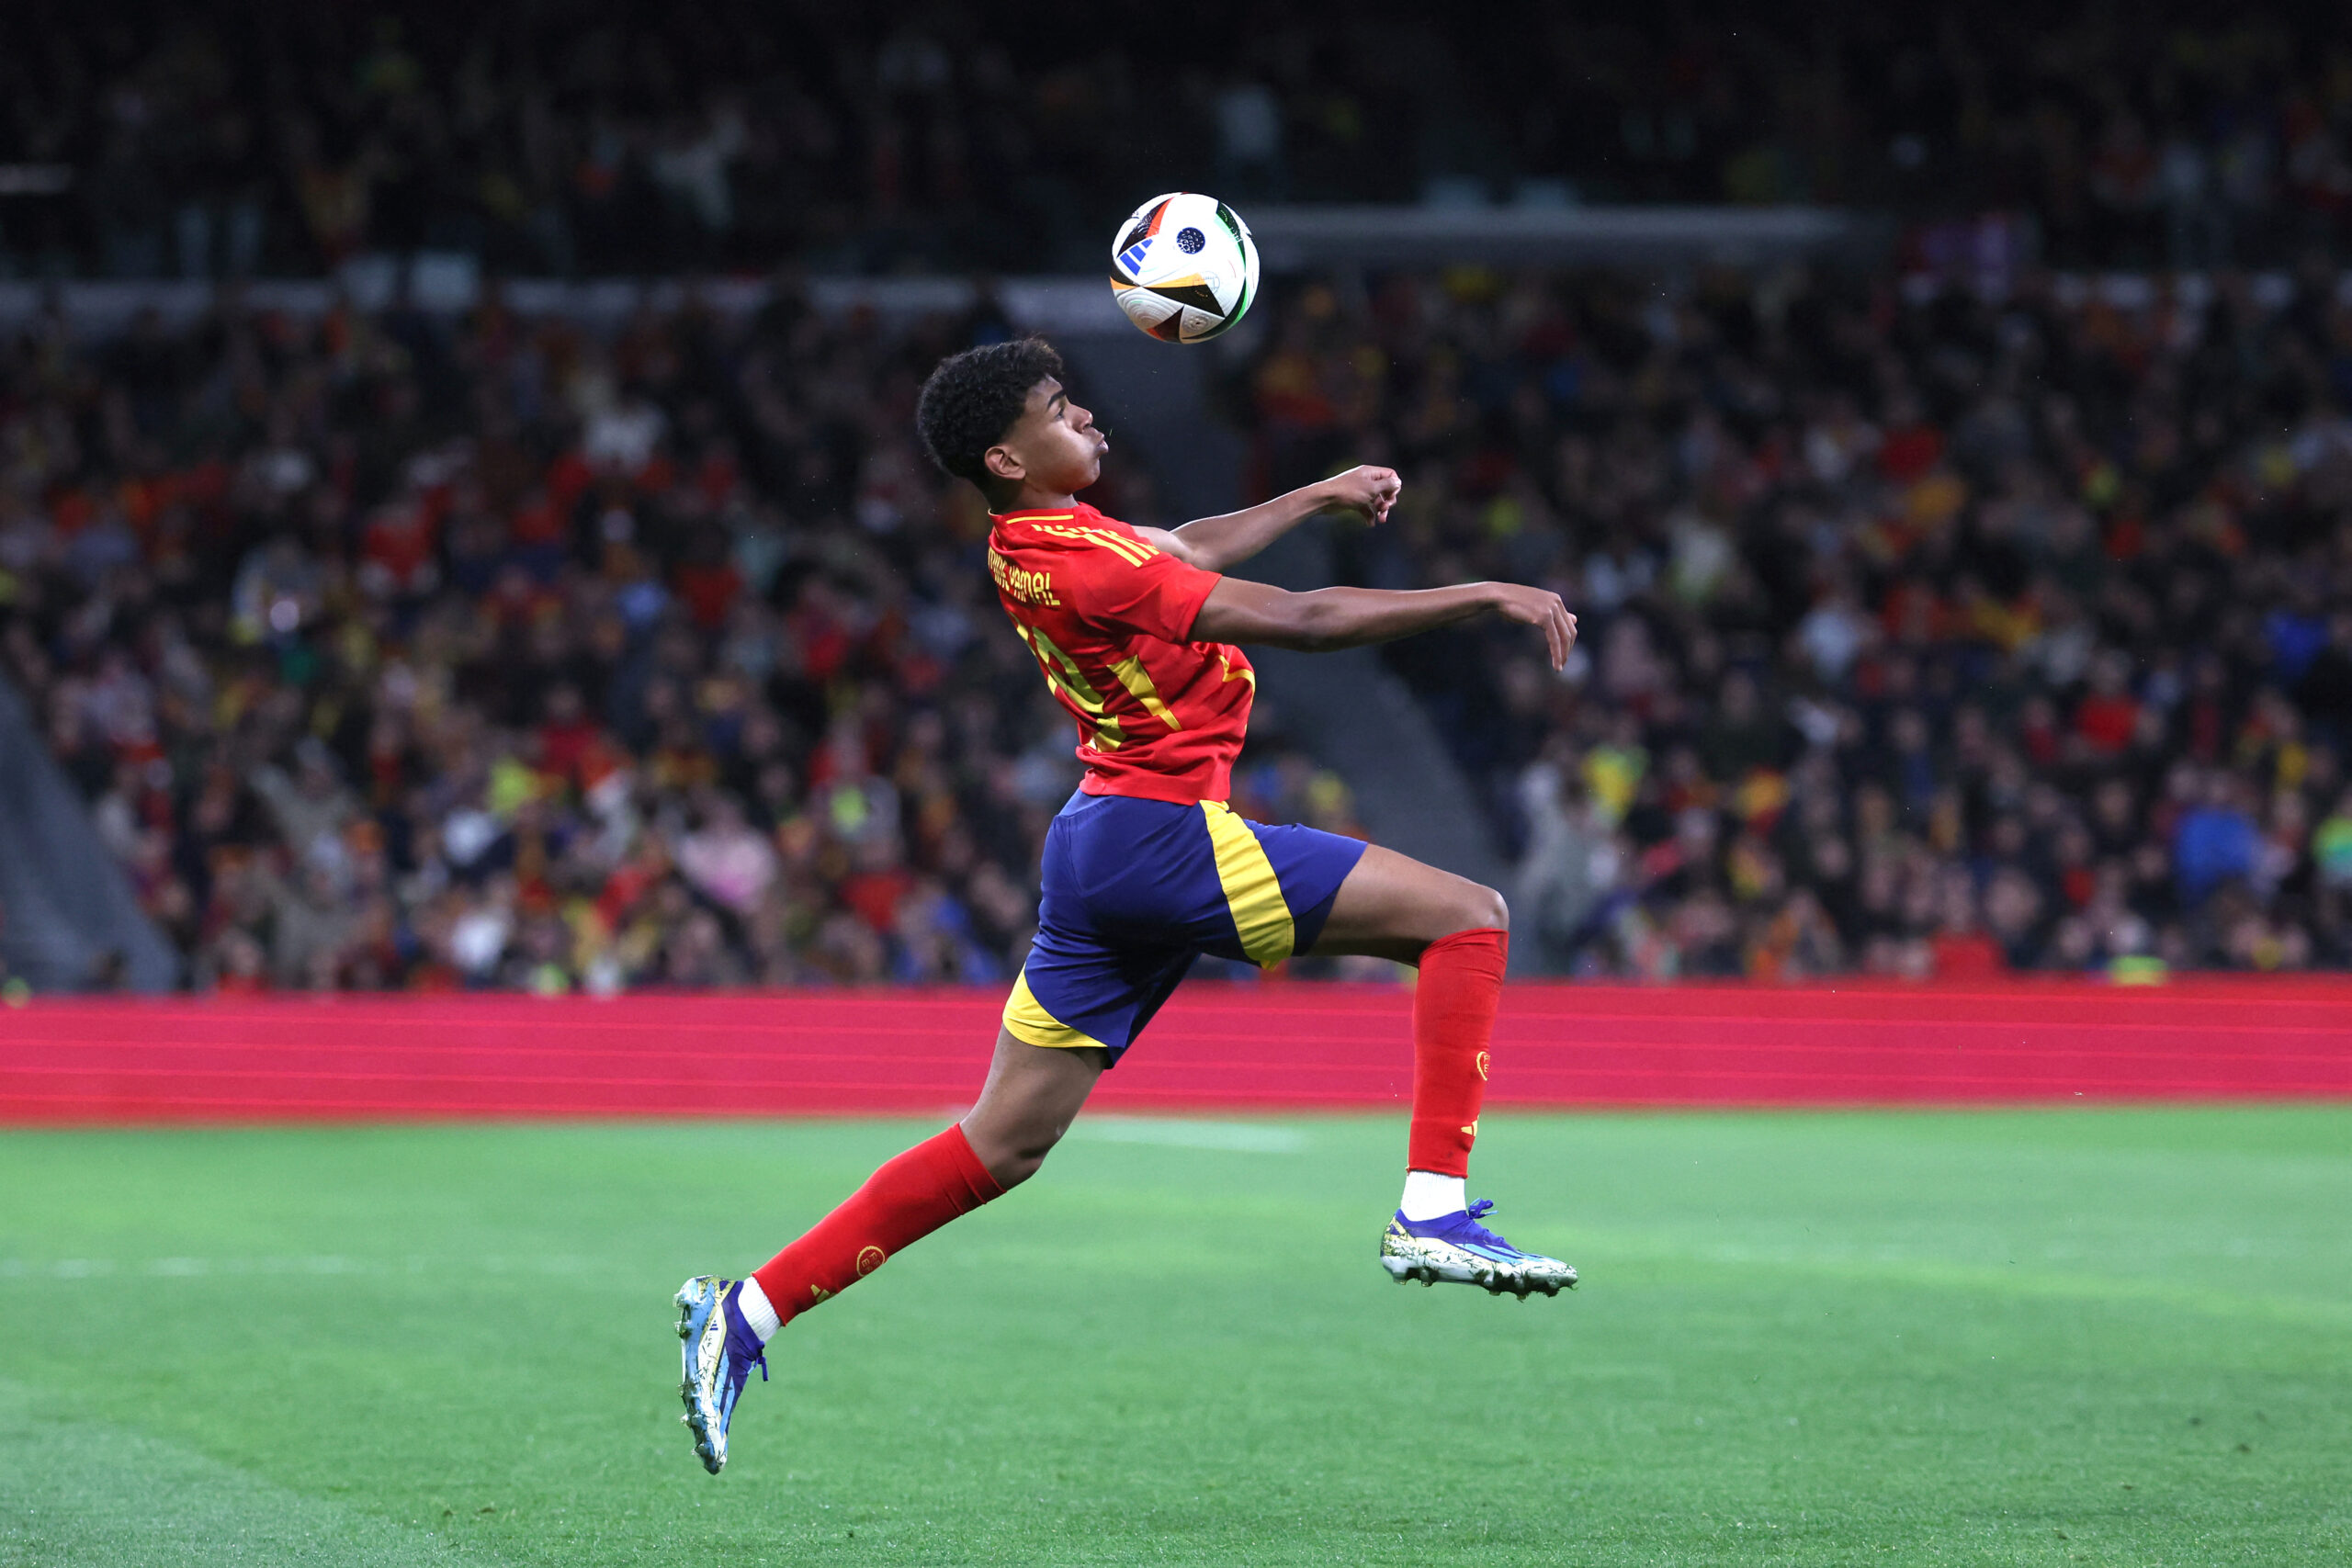 Spain's forward #19 Lamine Yamal controls the ball during the international friendly football match between Spain and Brazil at the Santiago Bernabeu stadium in Madrid, on March 26, 2024. Spain arranged a friendly against Brazil at the Santiago Bernabeu under the slogan "One Skin" to help combat racism. 